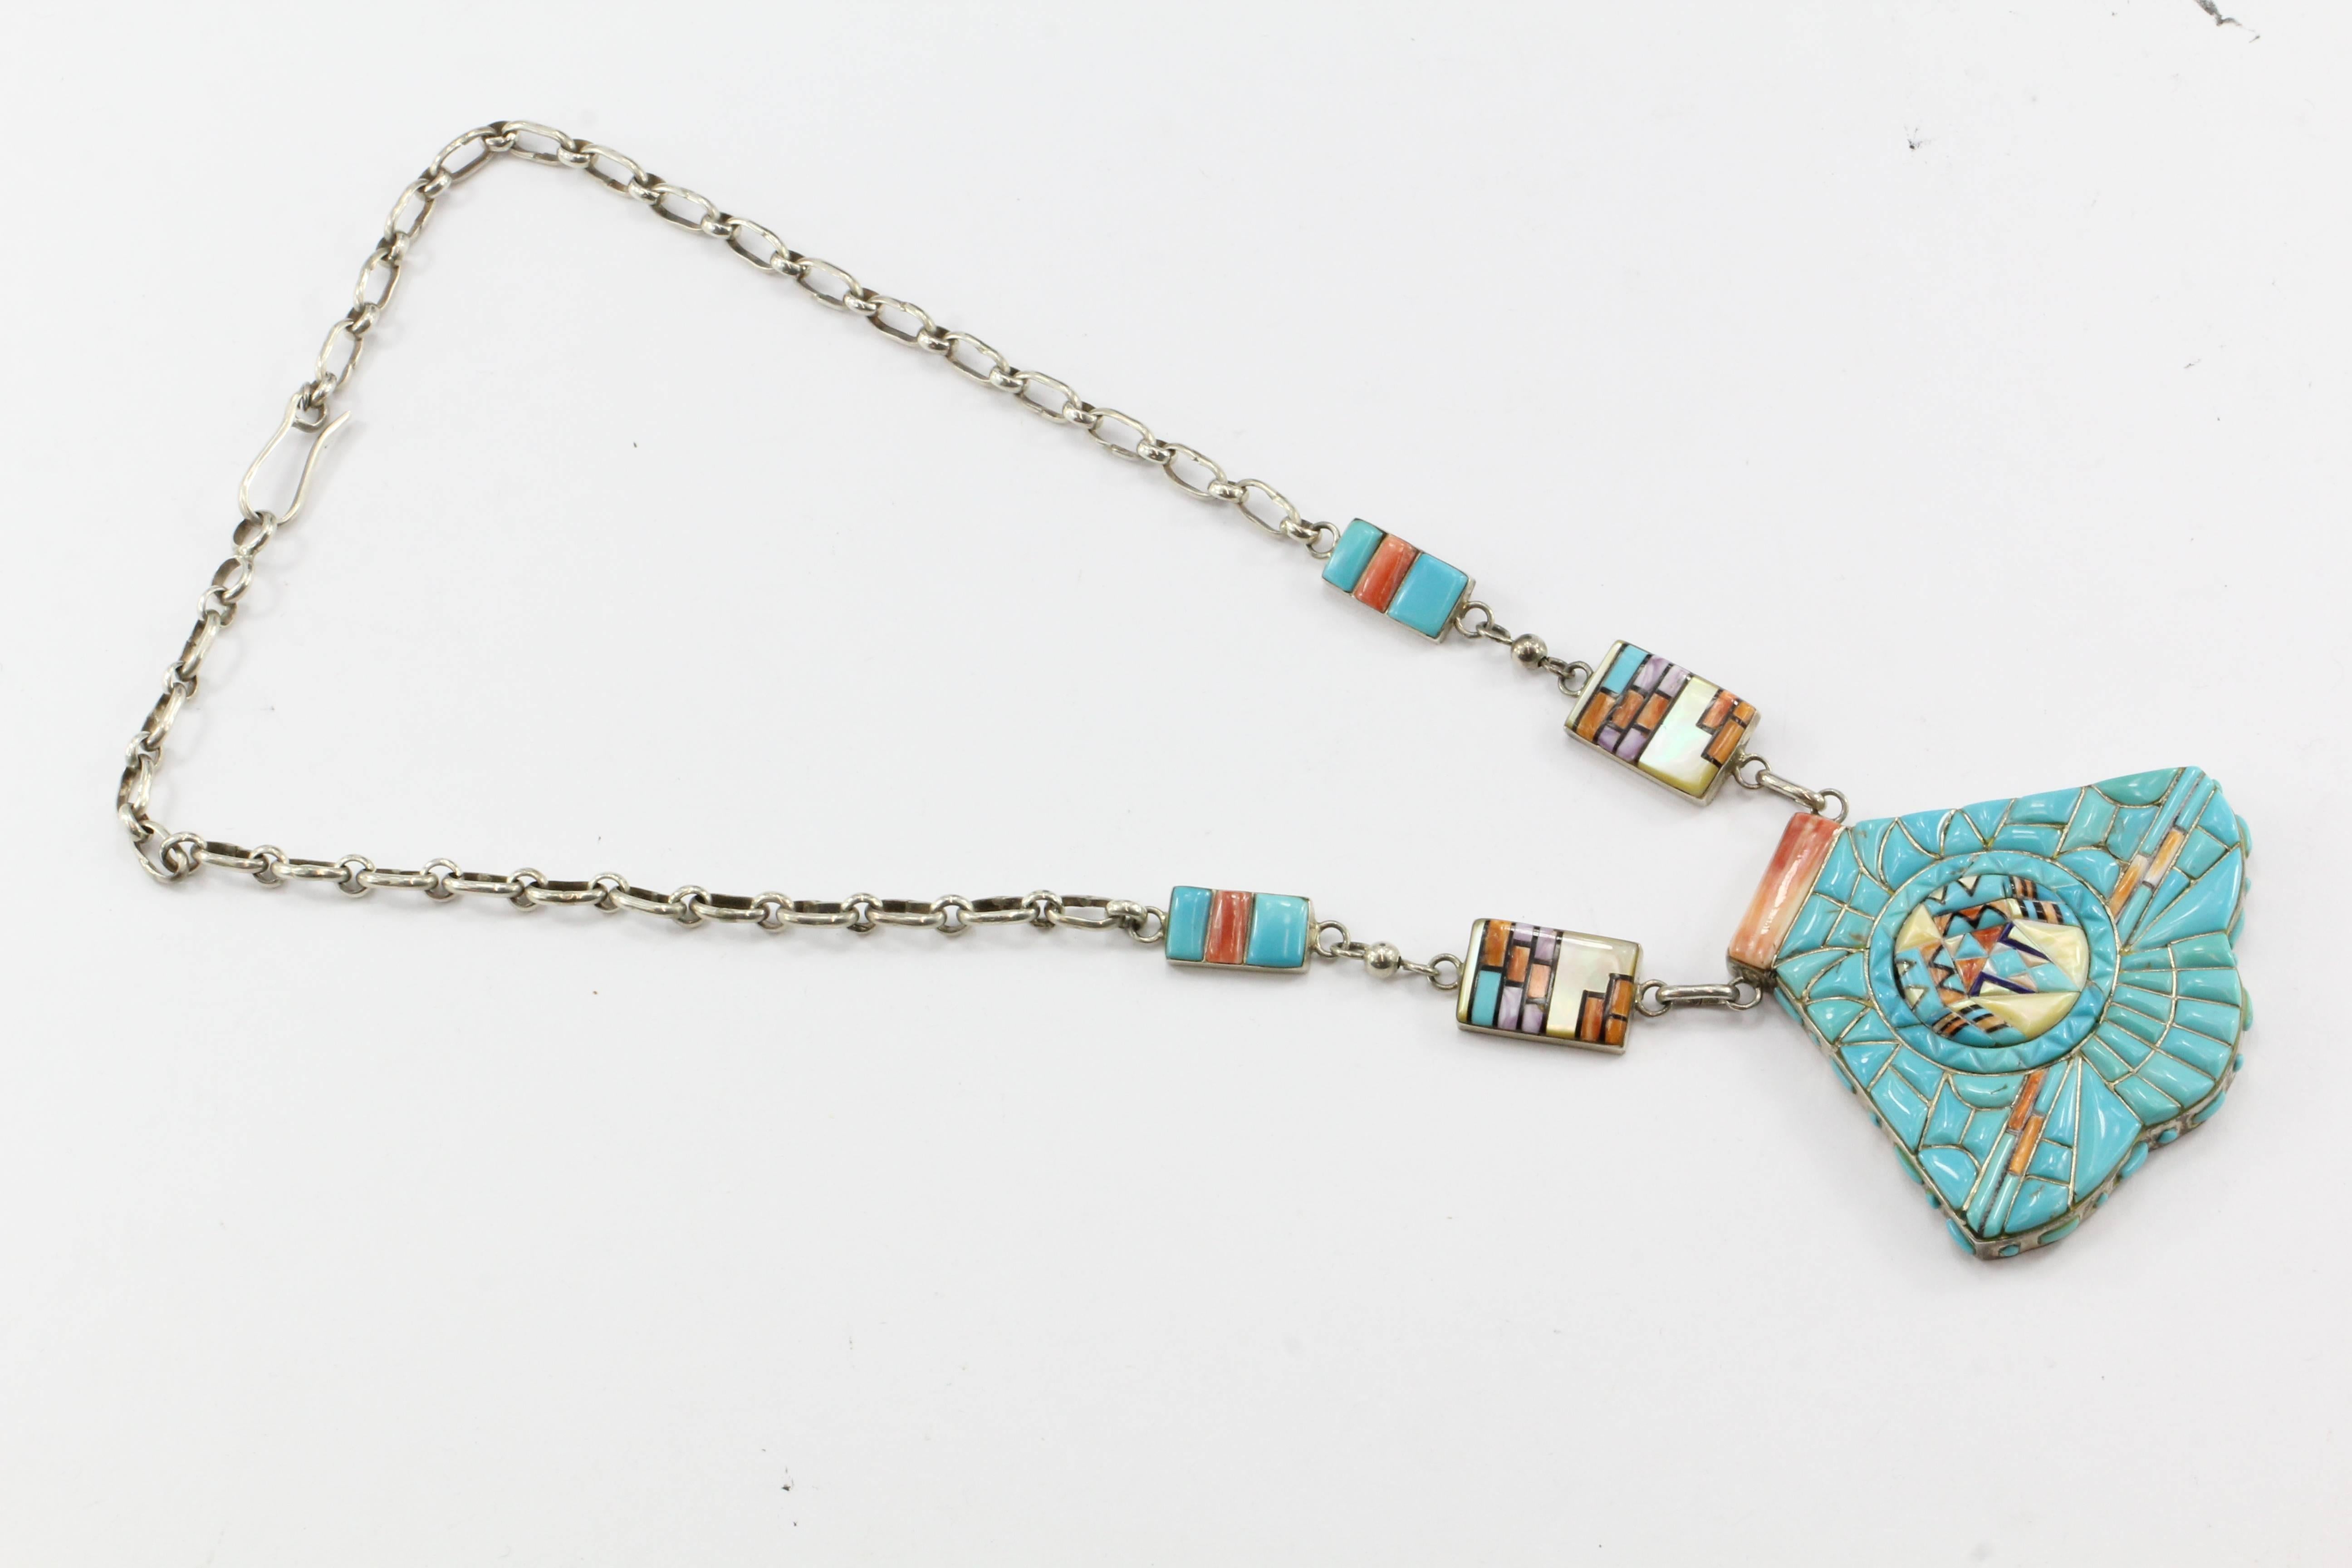 Zuni Sterling Silver Cobblestone Turquoise Inlaid Large Chunky Necklace

The necklace is in excellent estate condition and ready to wear. It is made of sterling silver and inlaid with primarily turquoise but also with spiny oyster, jet, mother of